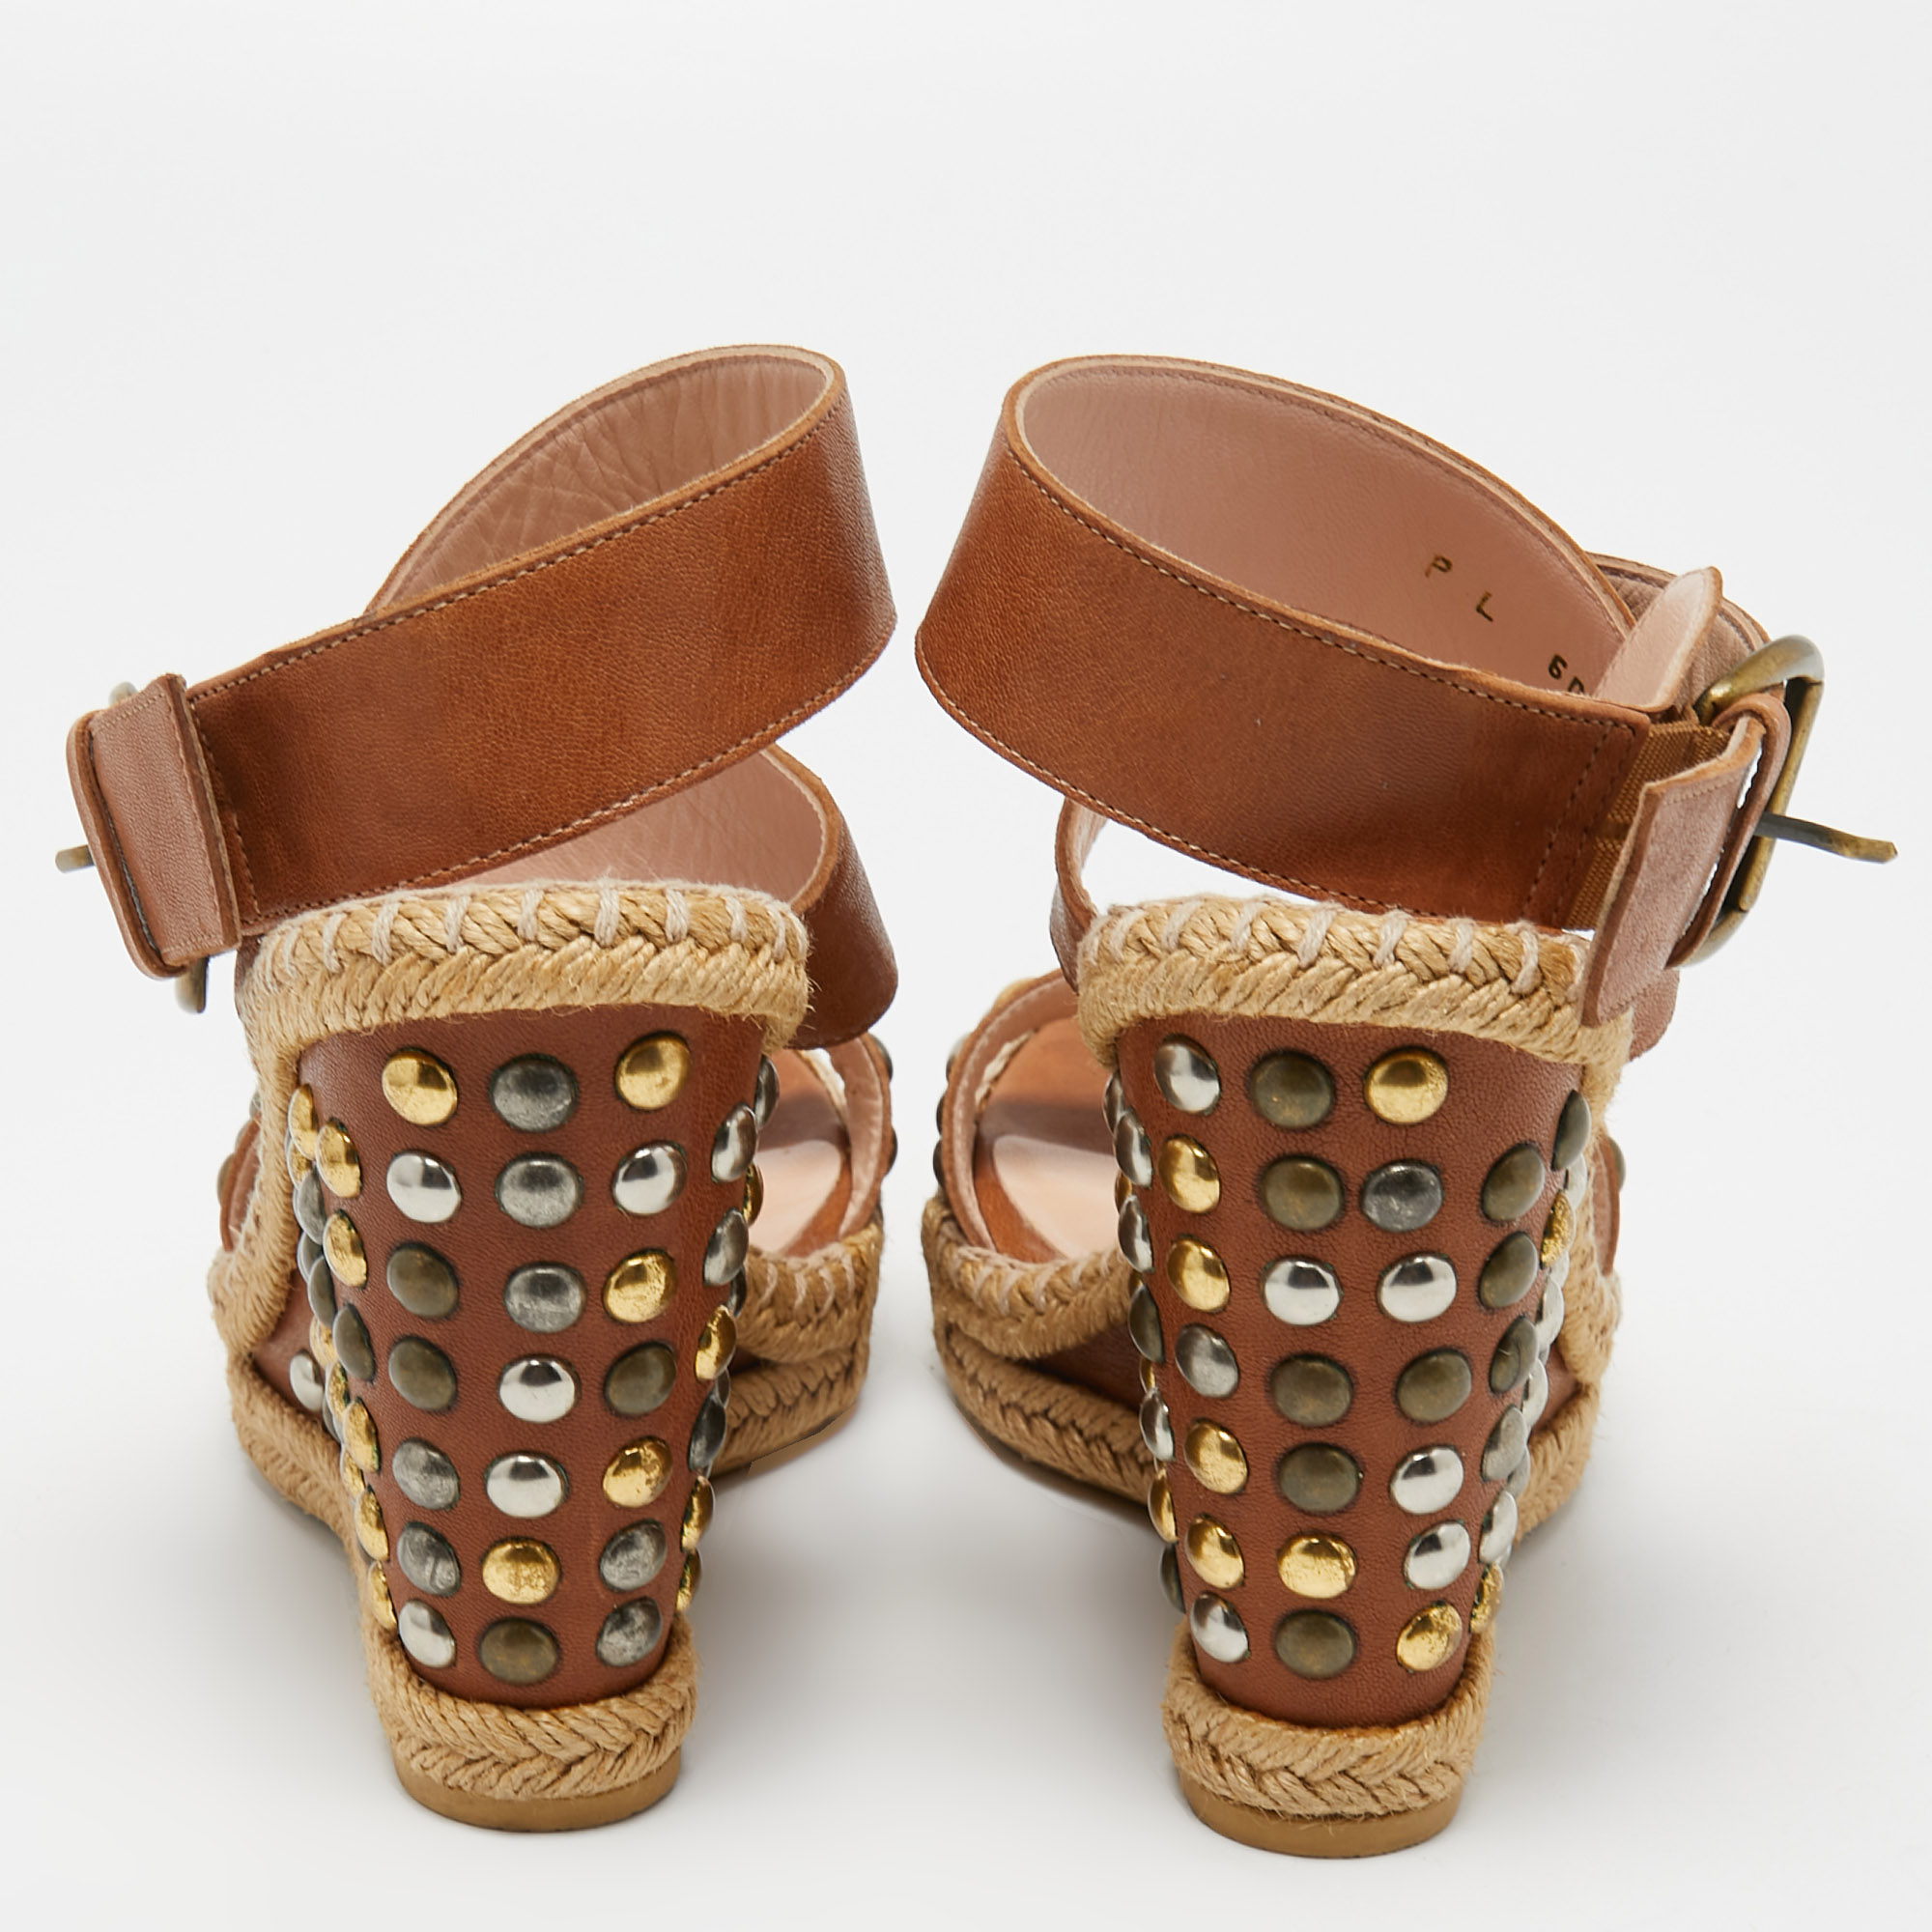 Stuart Weitzman Brown Studded Leather Hubcaps Wedge Sandals Size 39